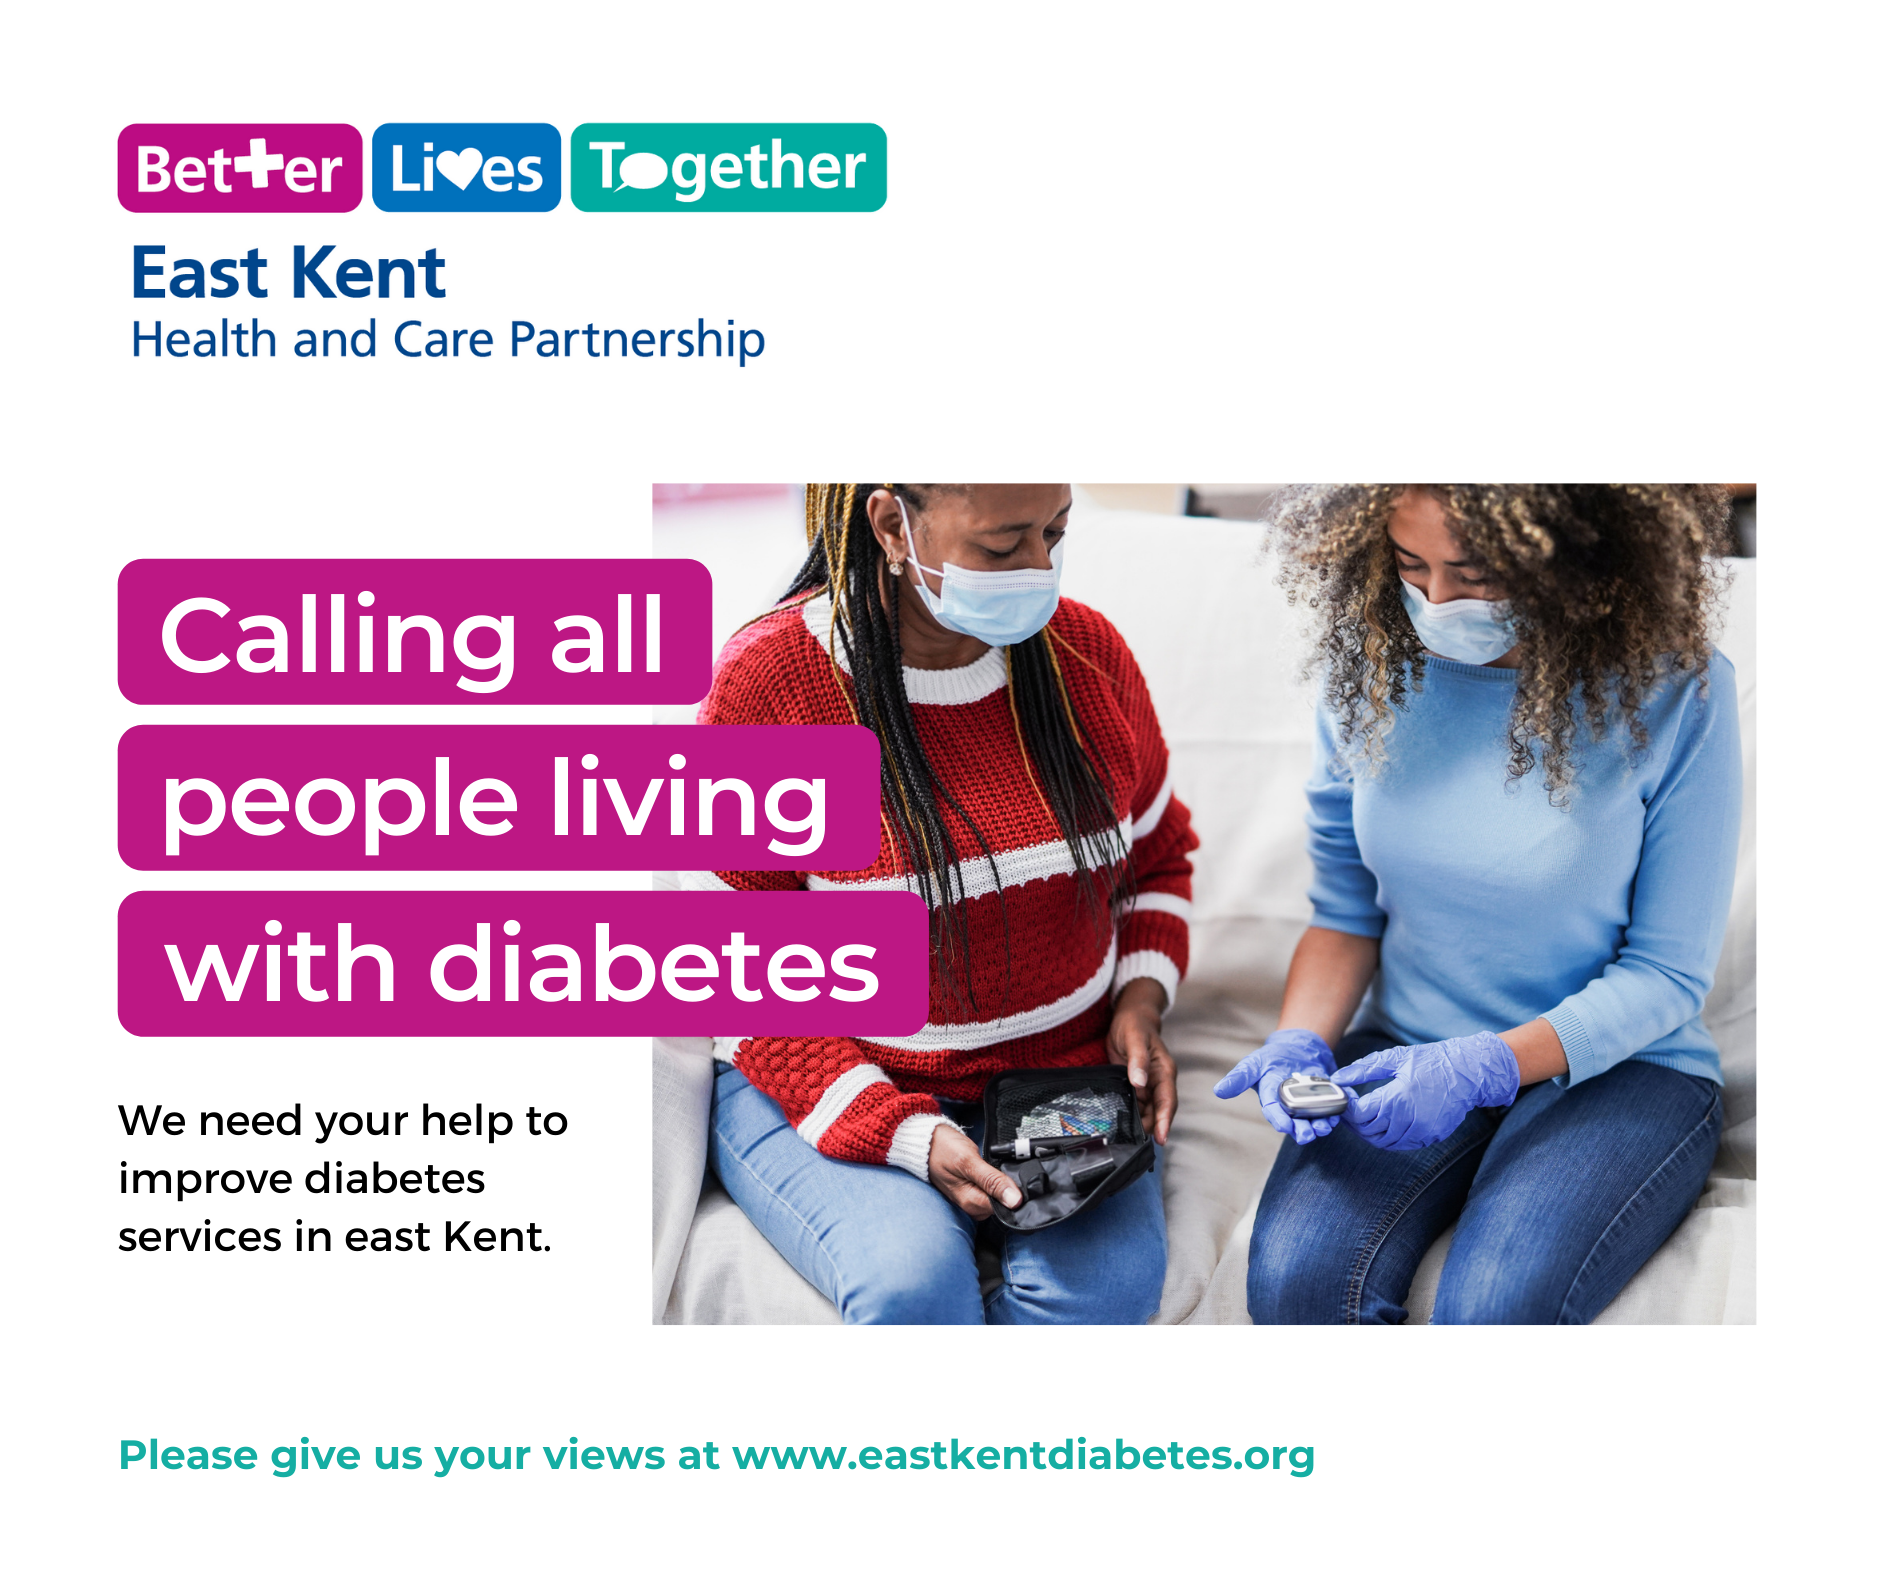 Have your say and help improve diabetes care in east Kent